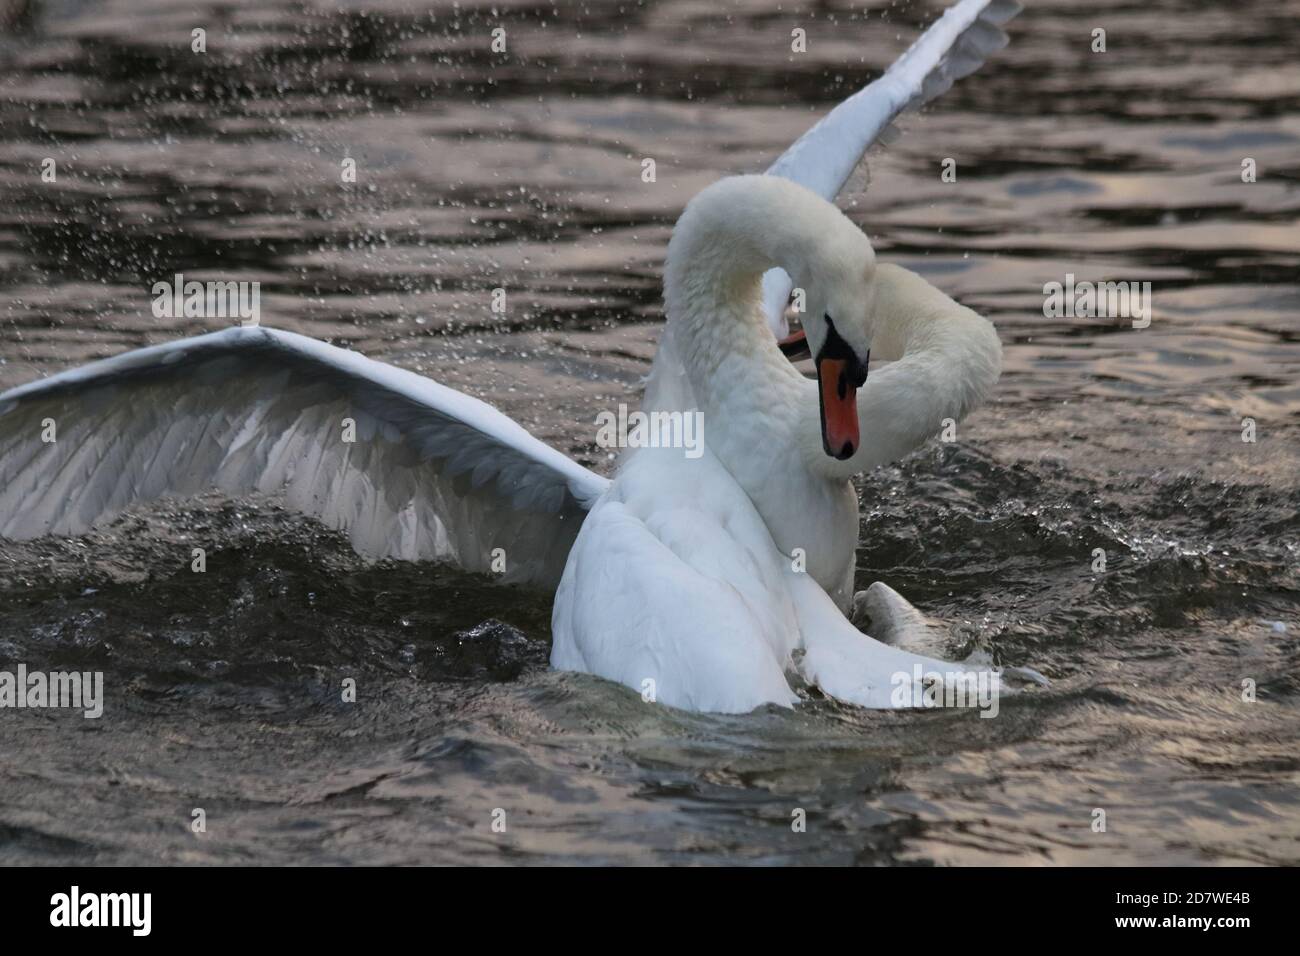 Swans that are fighting in a spectacular way on a river. Stock Photo